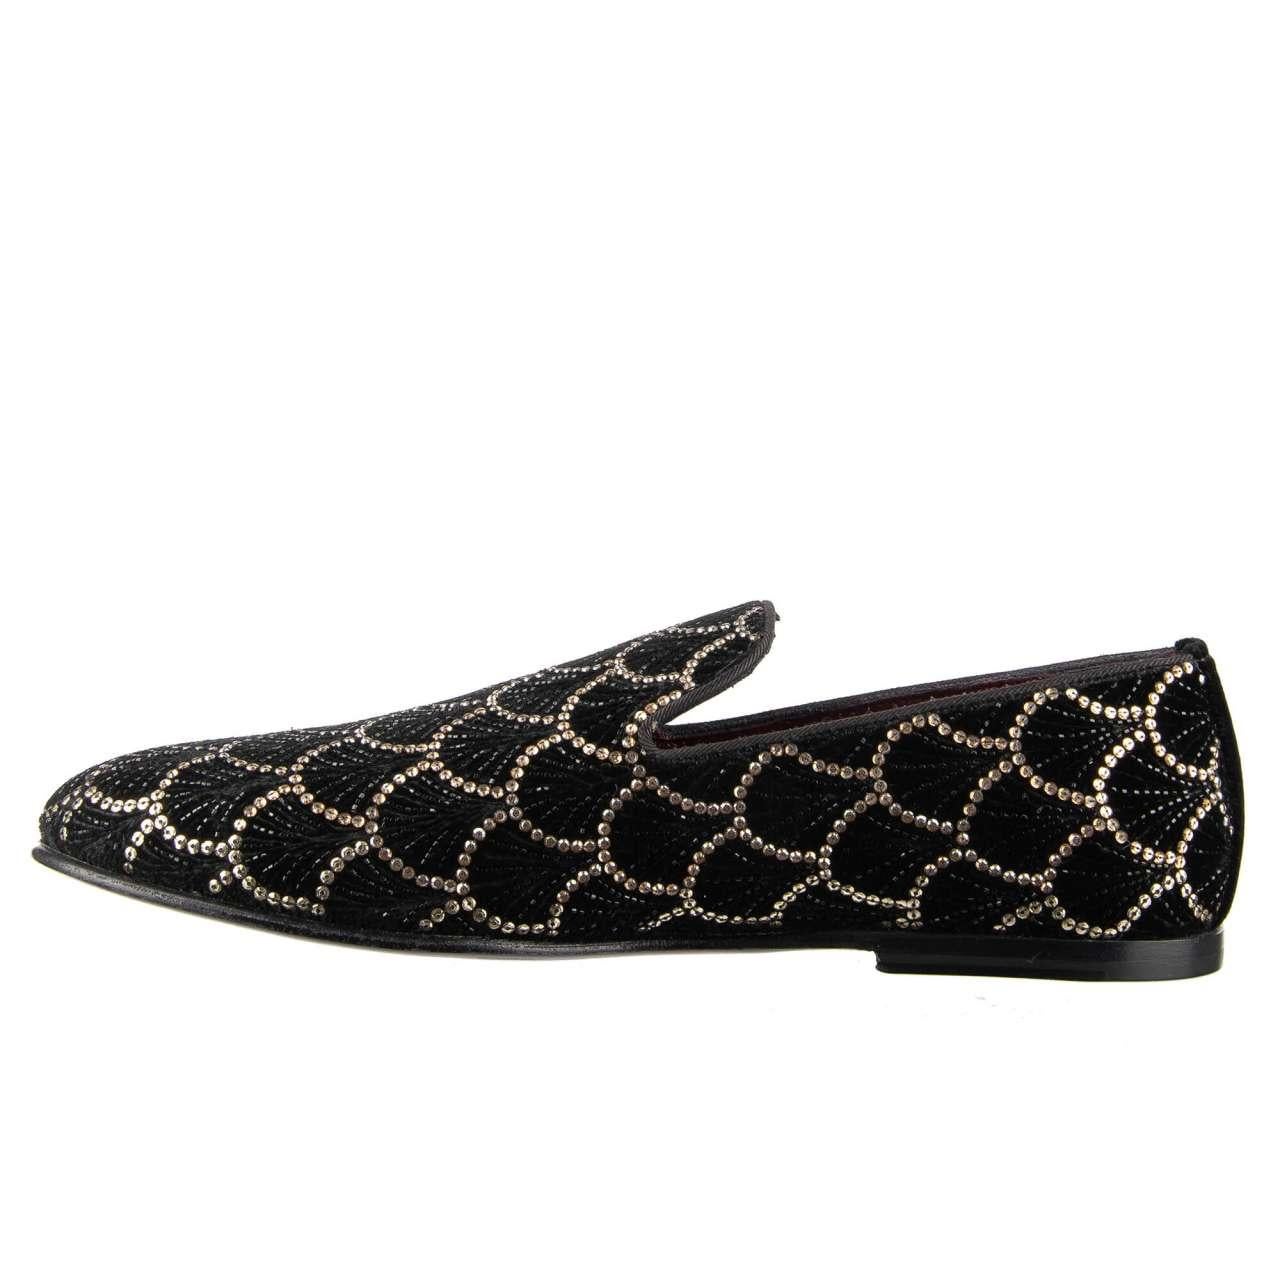 Dolce & Gabbana Crystals Embroidered Loafer Shoes ISPICA Black Gold EUR 42 In Excellent Condition For Sale In Erkrath, DE